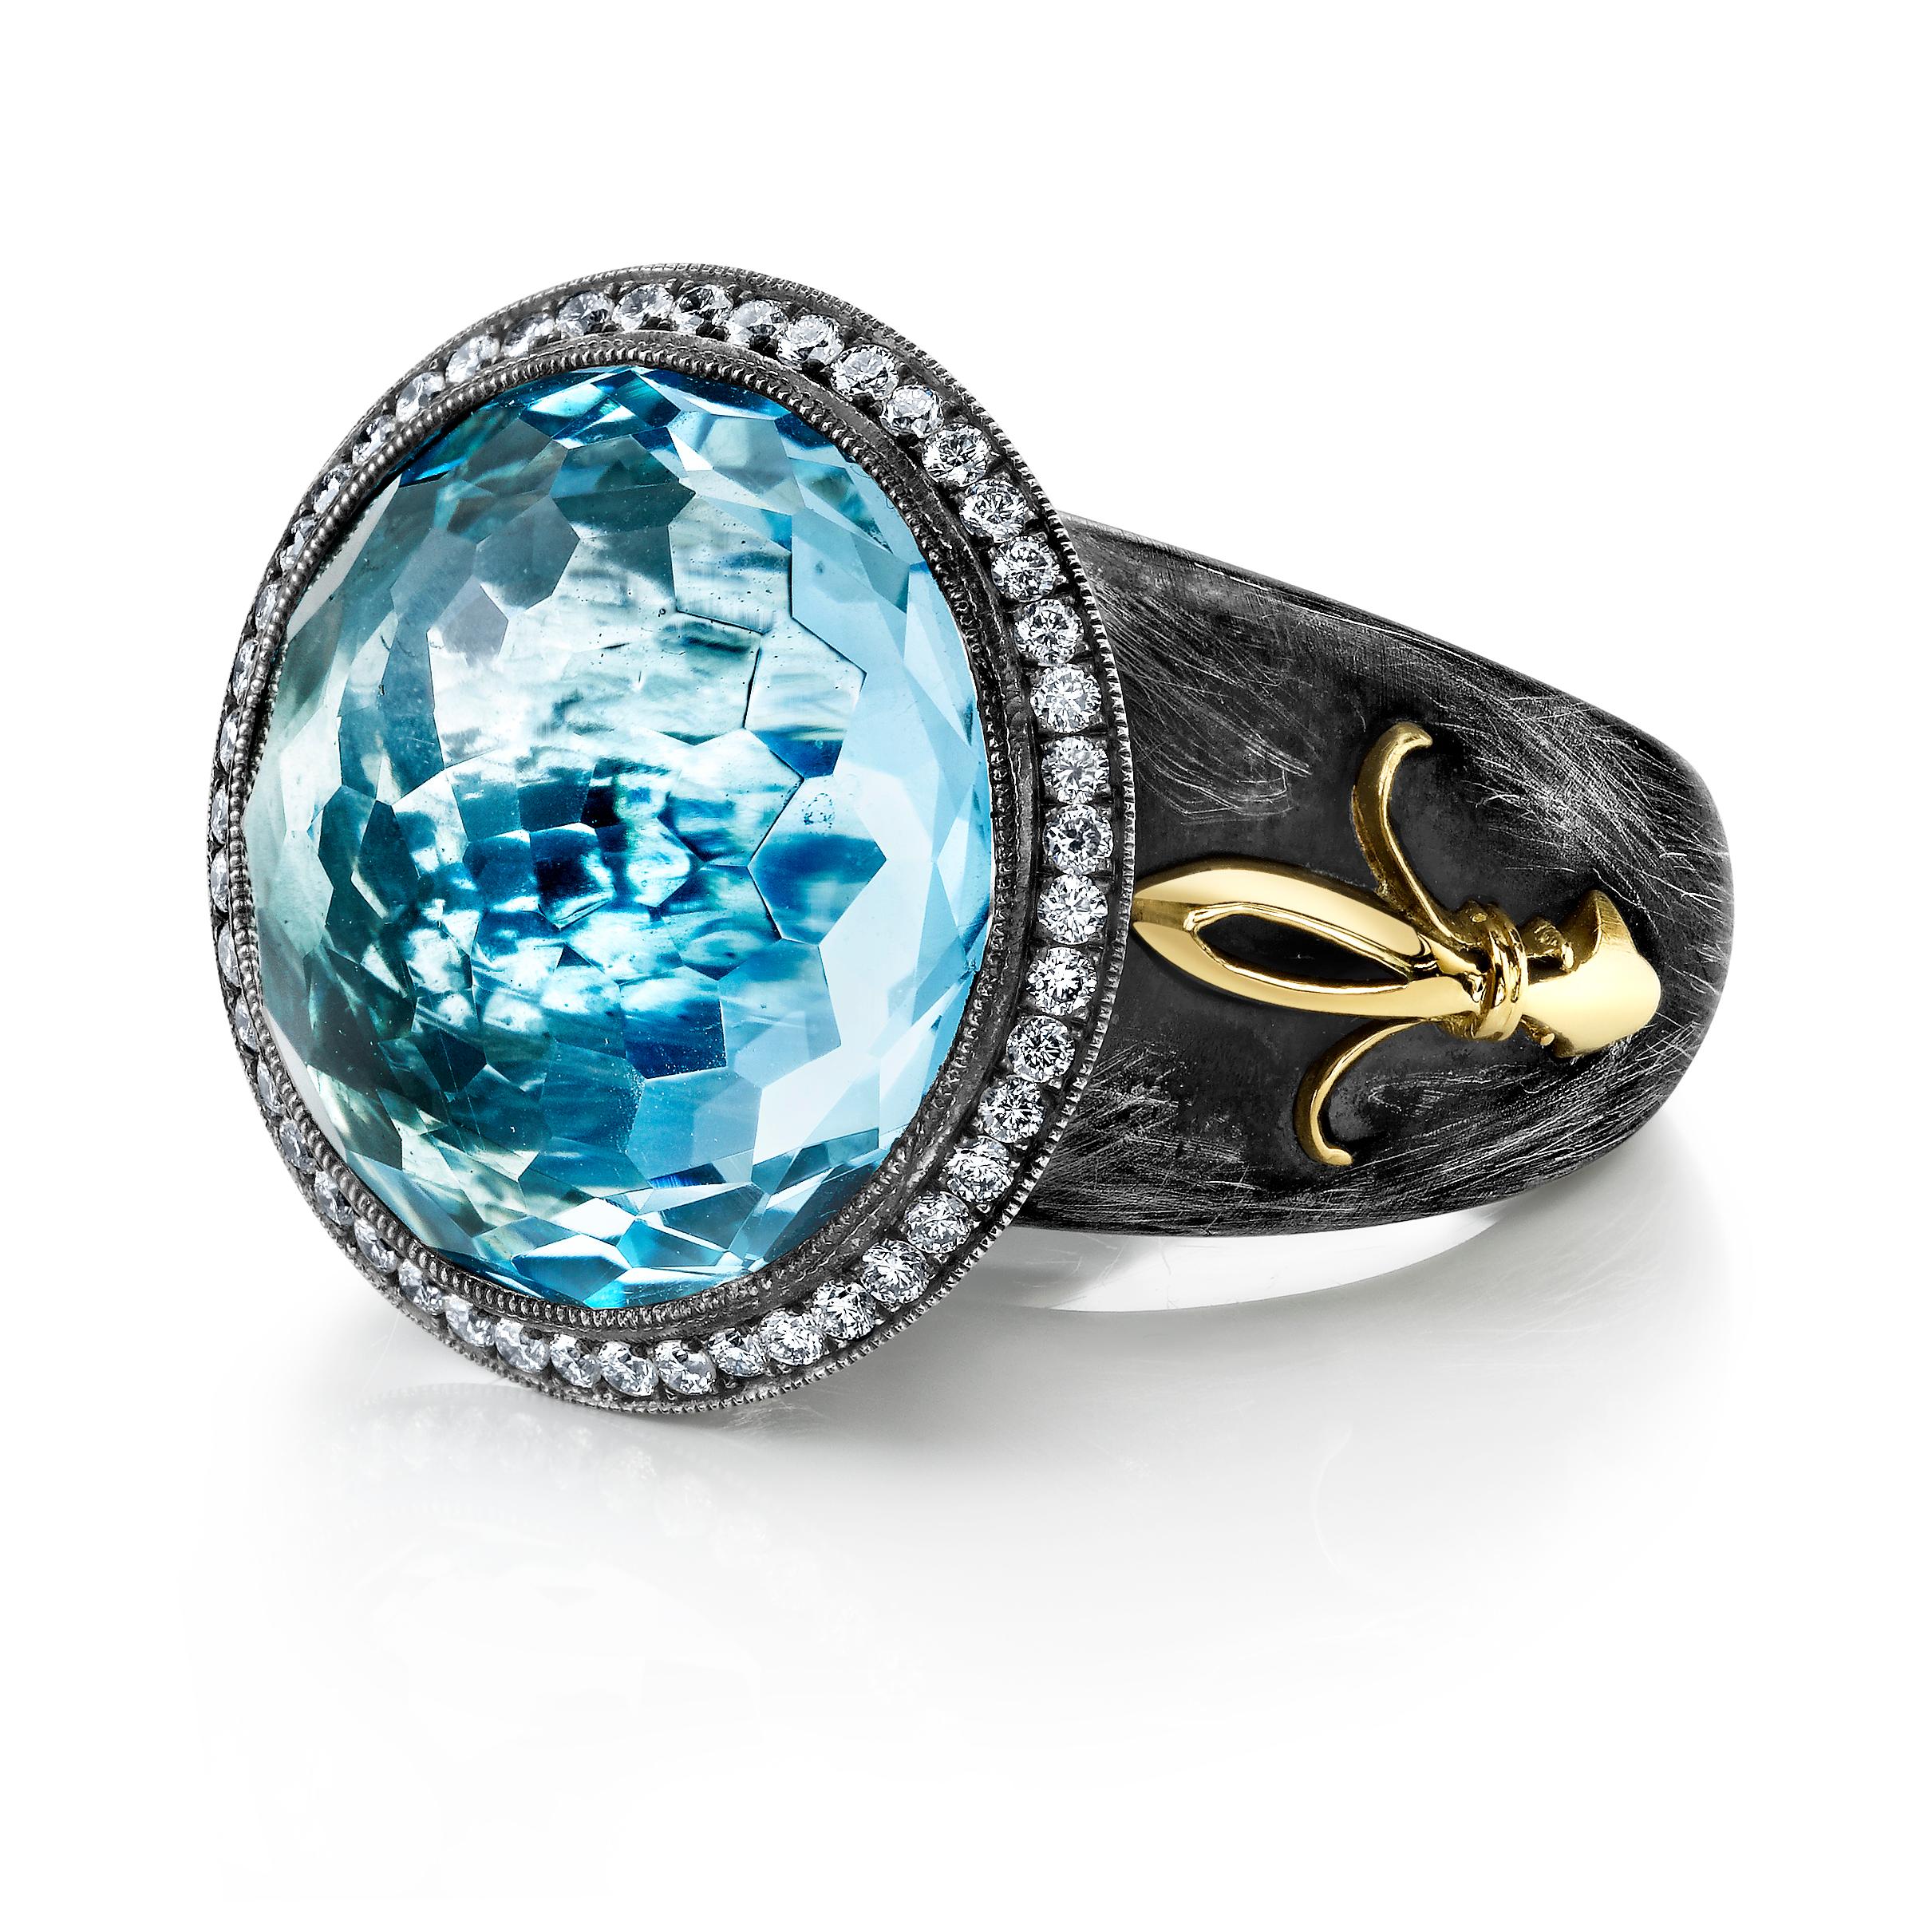 Introducing the Organic Silver and Blue Topaz Ring with a stunning Fleur De Lis design in 18 Karat Yellow Gold. This breathtaking piece of jewelry showcases a 20+ CT Blue Topaz center stone, surrounded by sparkling 0.43 CT diamonds that add an extra